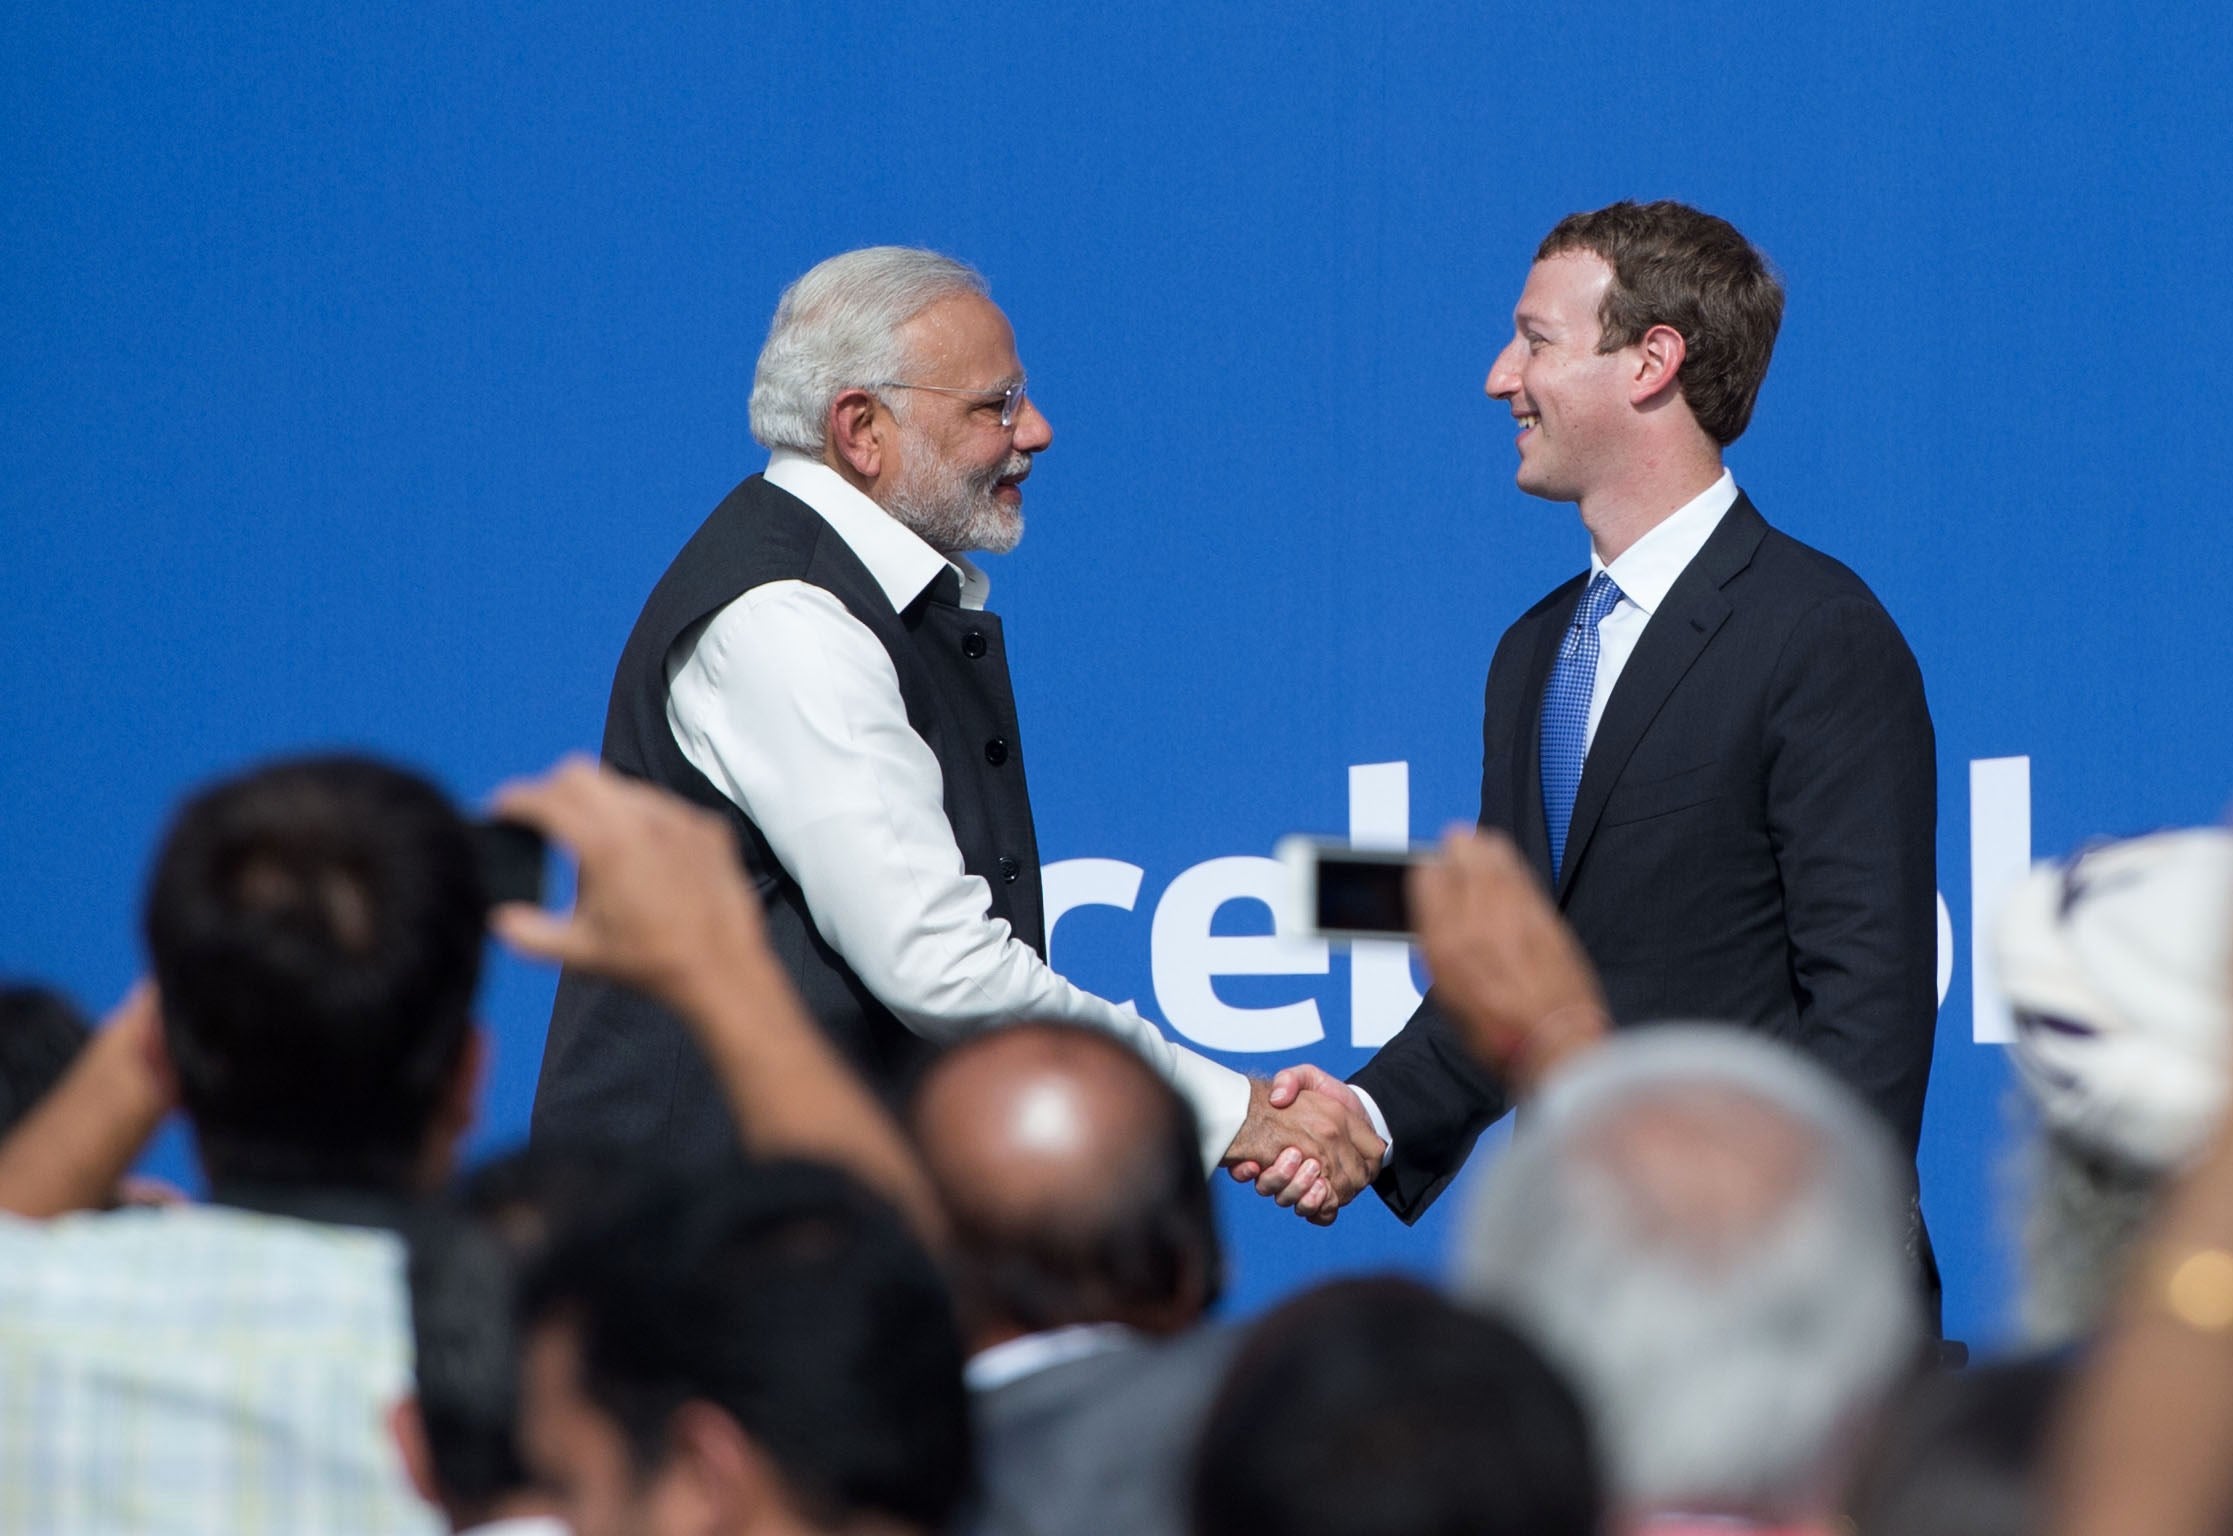 Indian Prime Minister Narendra Modi (L) and Facebook CEO Mark Zuckerberg shake hands after a Townhall meeting, at Facebook headquarters